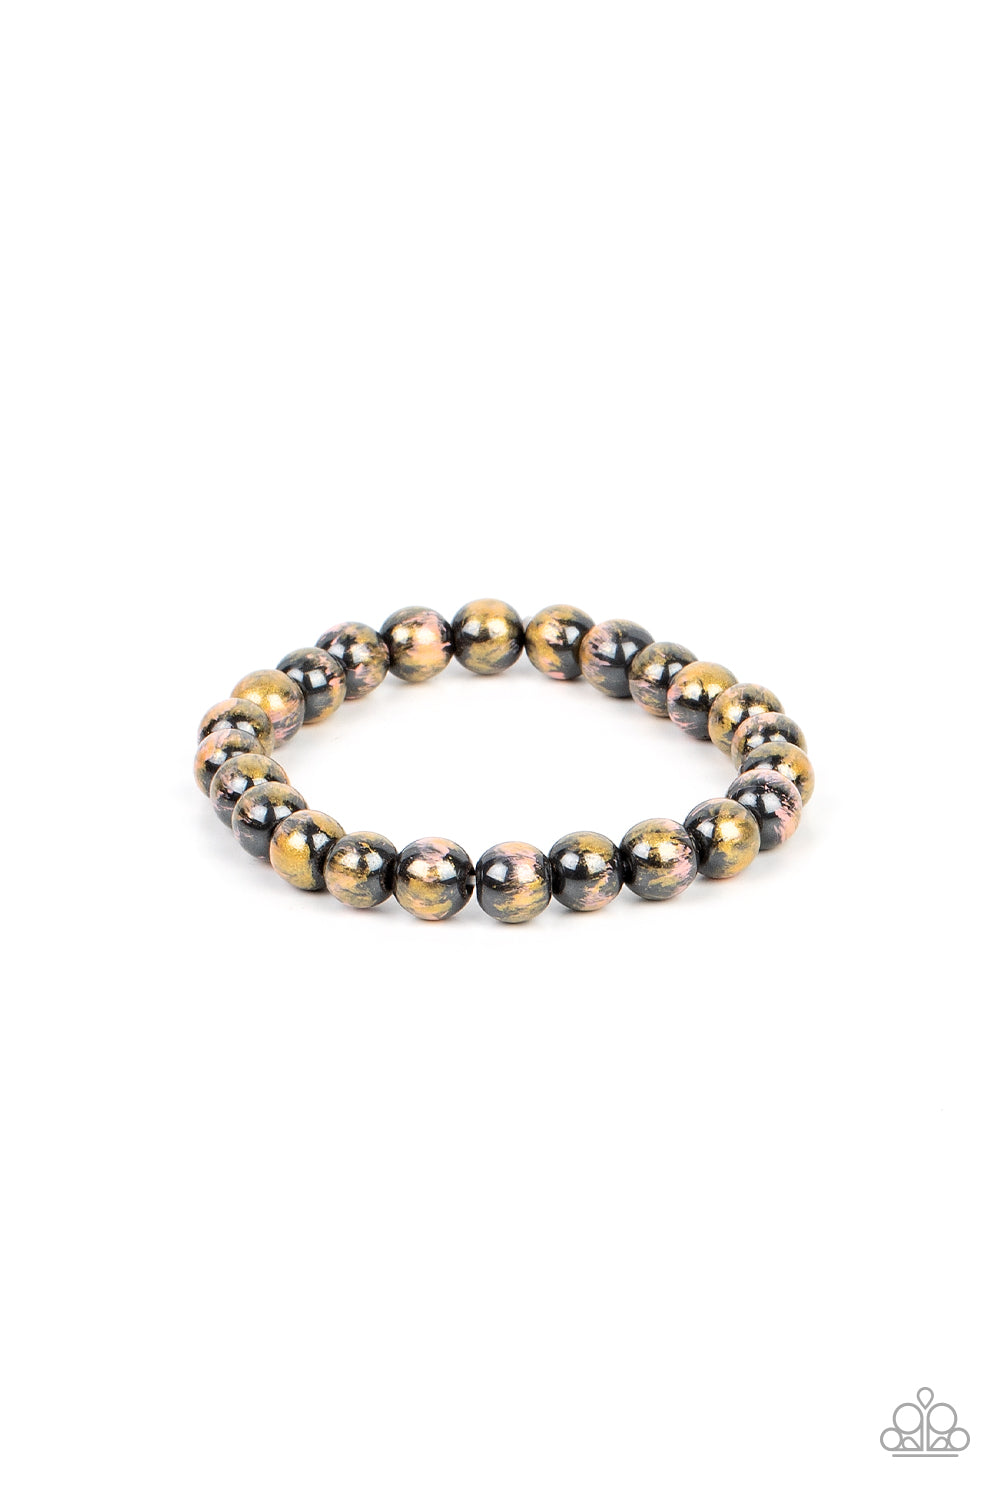 Astro Artistry Pink Bracelet - Paparazzi Accessories  Speckled in gold and pink paint, shiny gunmetal beads are threaded along stretchy bands around the wrist for a stellar effect.  Sold as one individual bracelet.